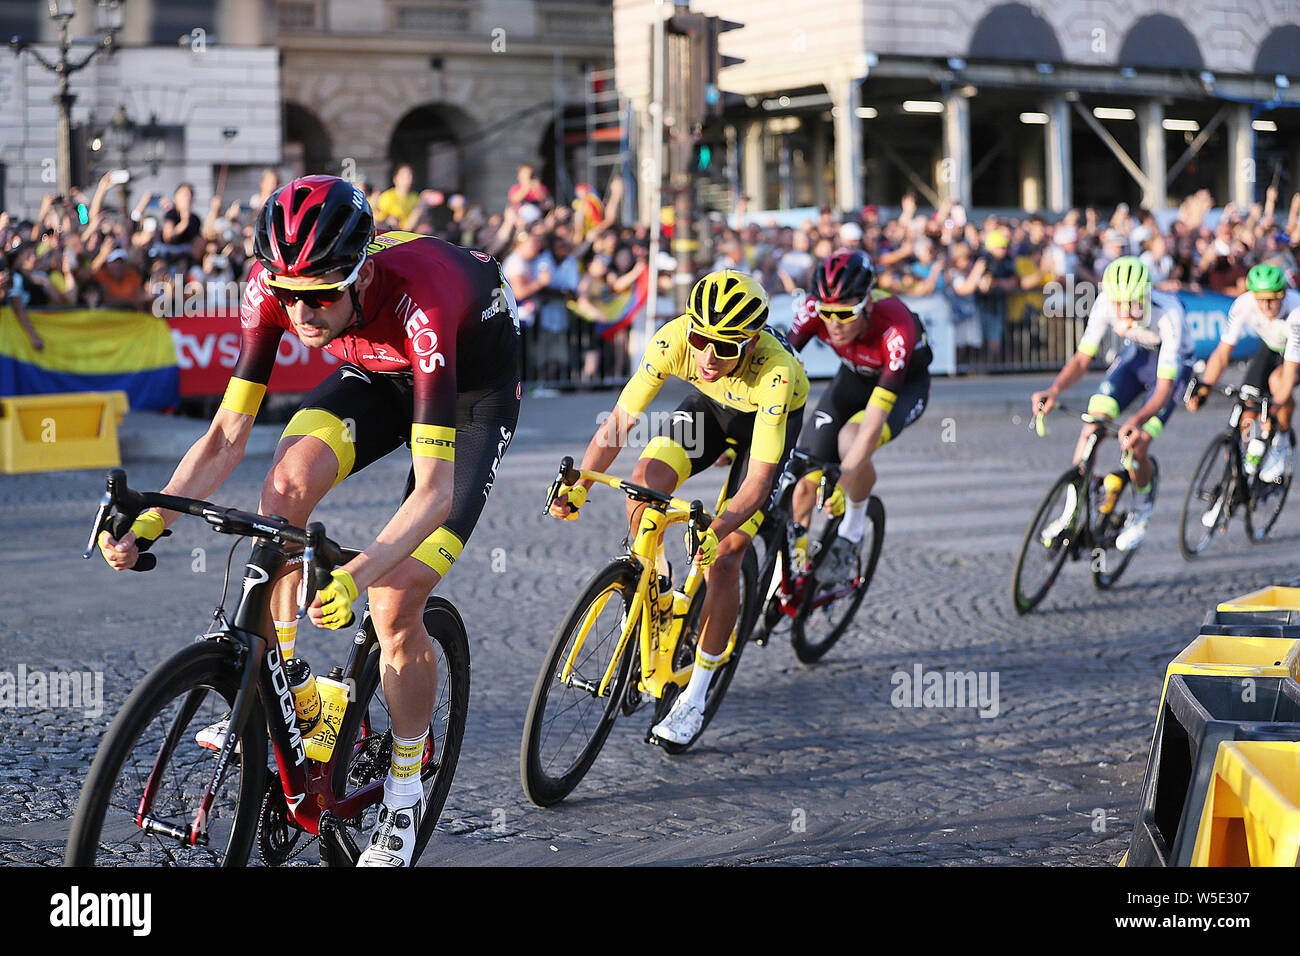 Paris - 27-07-2019, cycling, Stage 21, etappe 21, Rambouillet - Paris, champs-elysees, Wout Poels for Egan Bernal on the way to the finish at the champs elysees Stock Photo